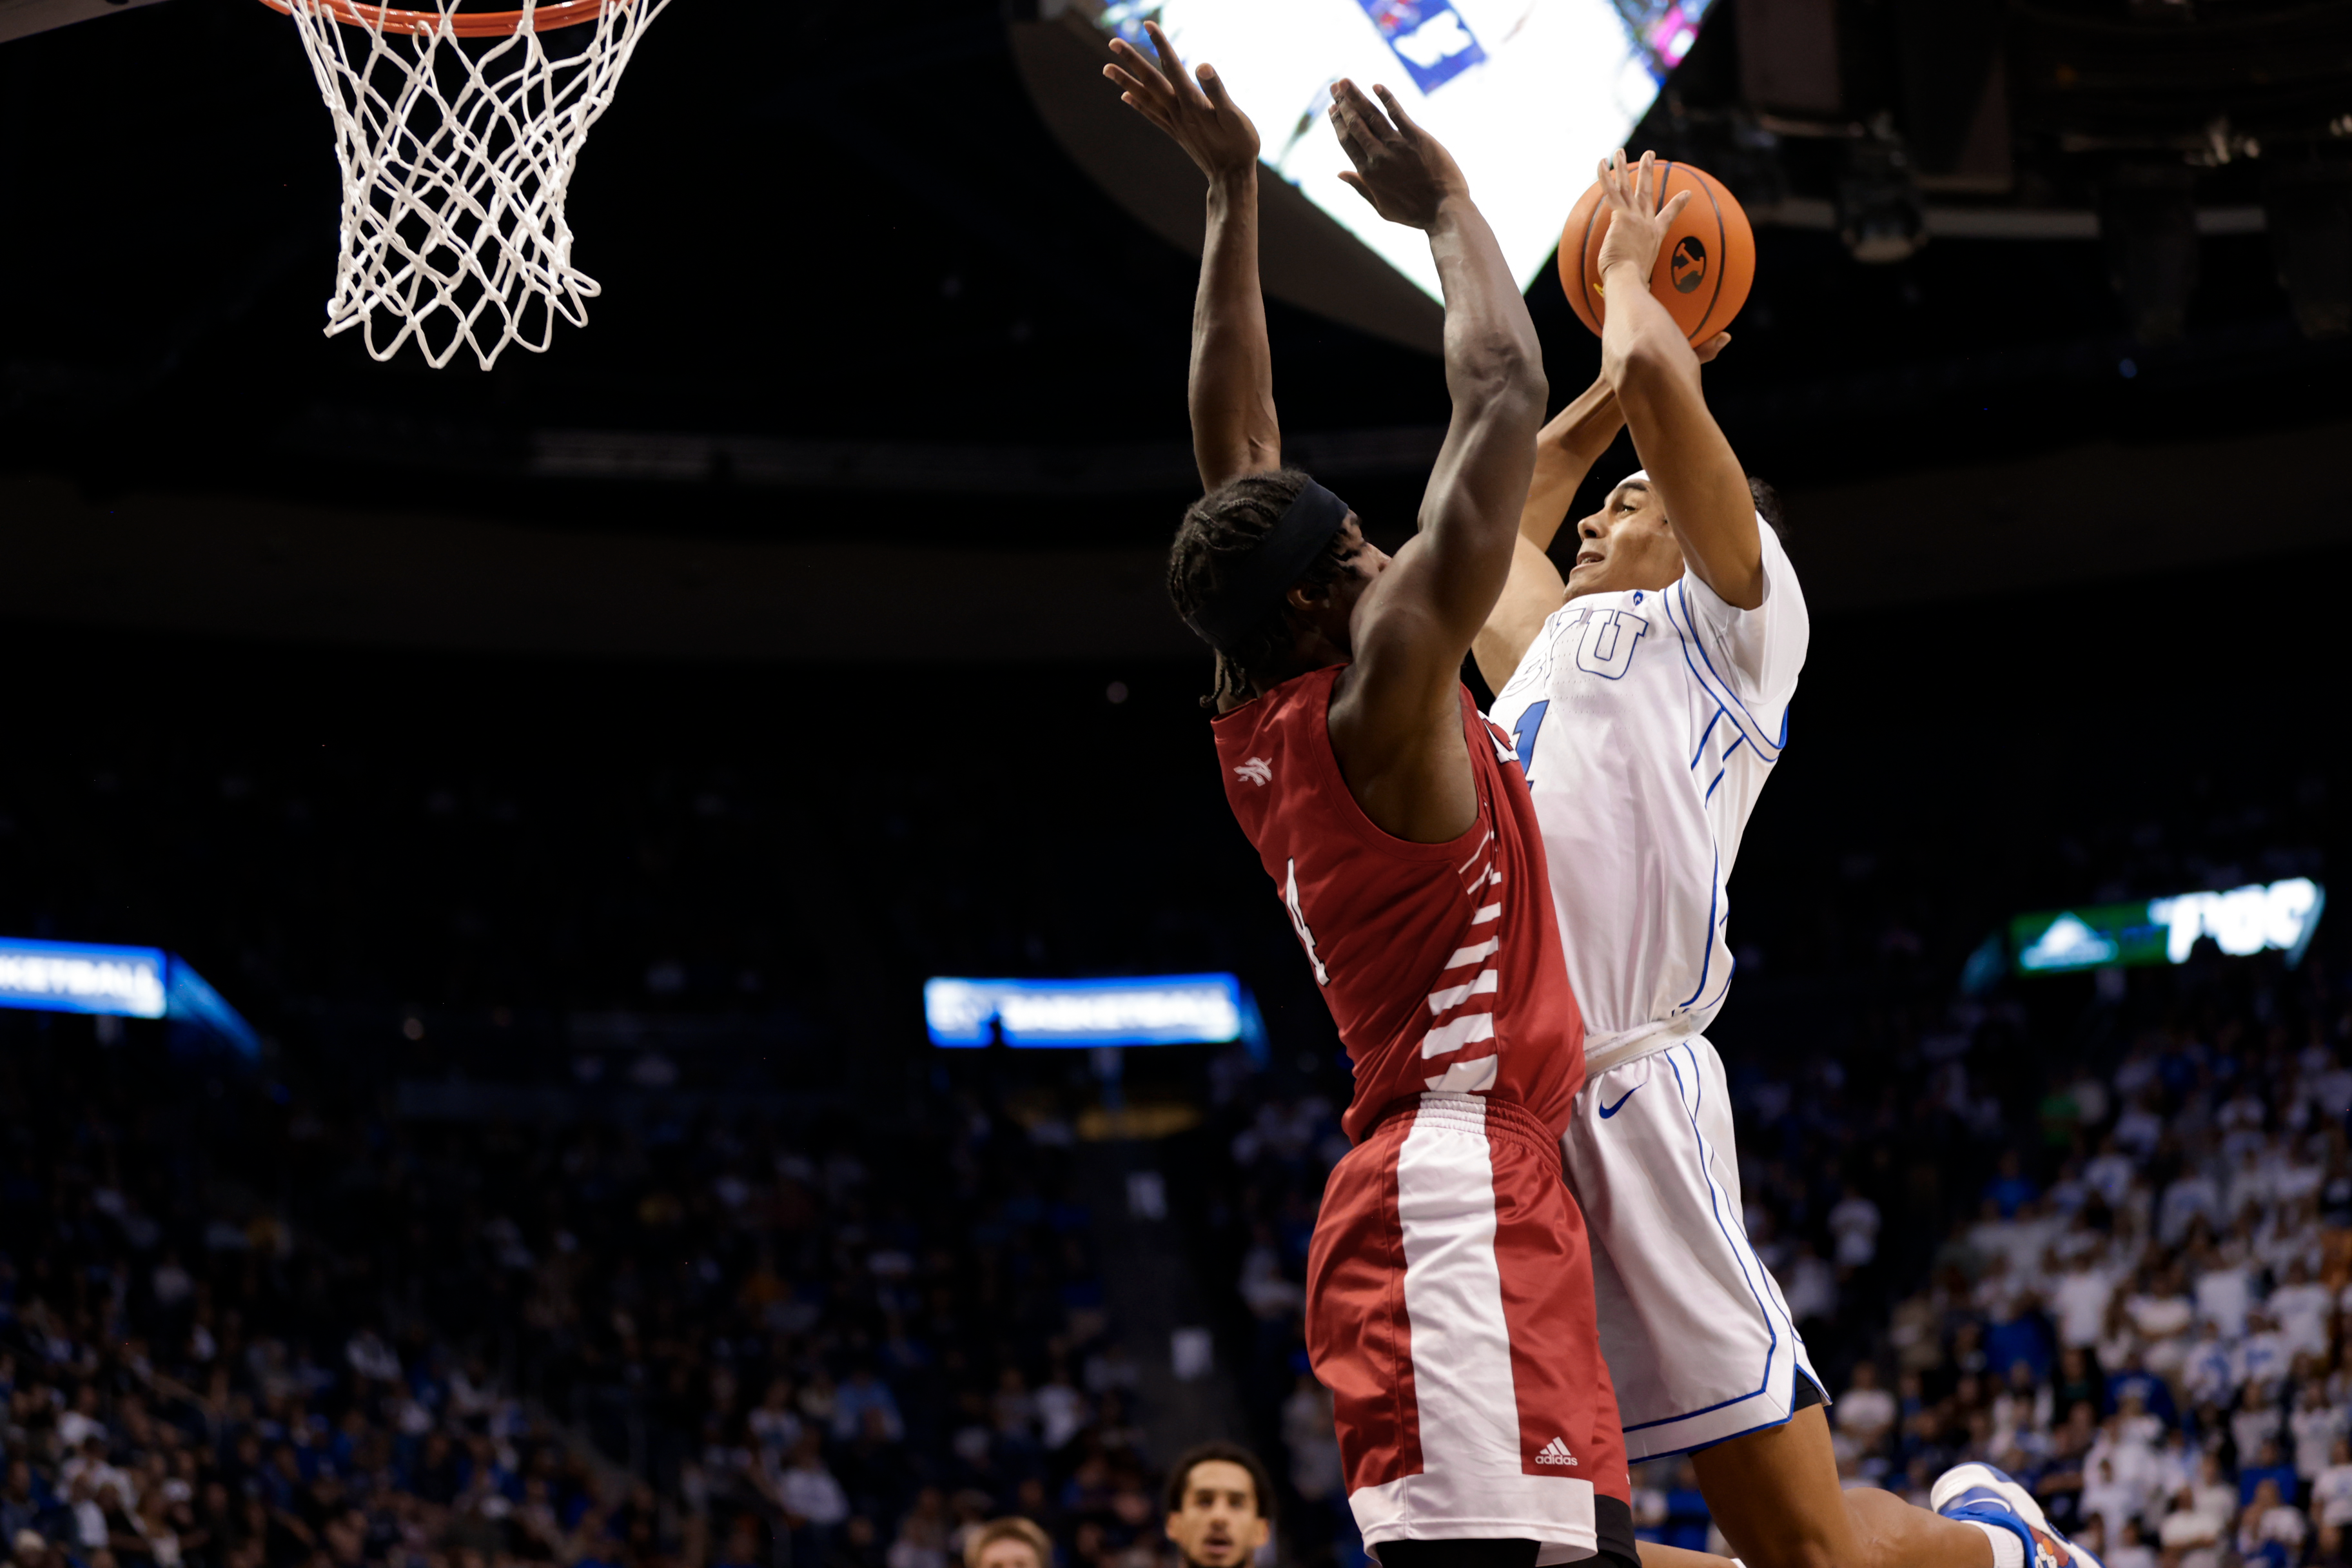 Trey Stewart drives to the basket for a layup during an 87-73 win at the Marriott Center.